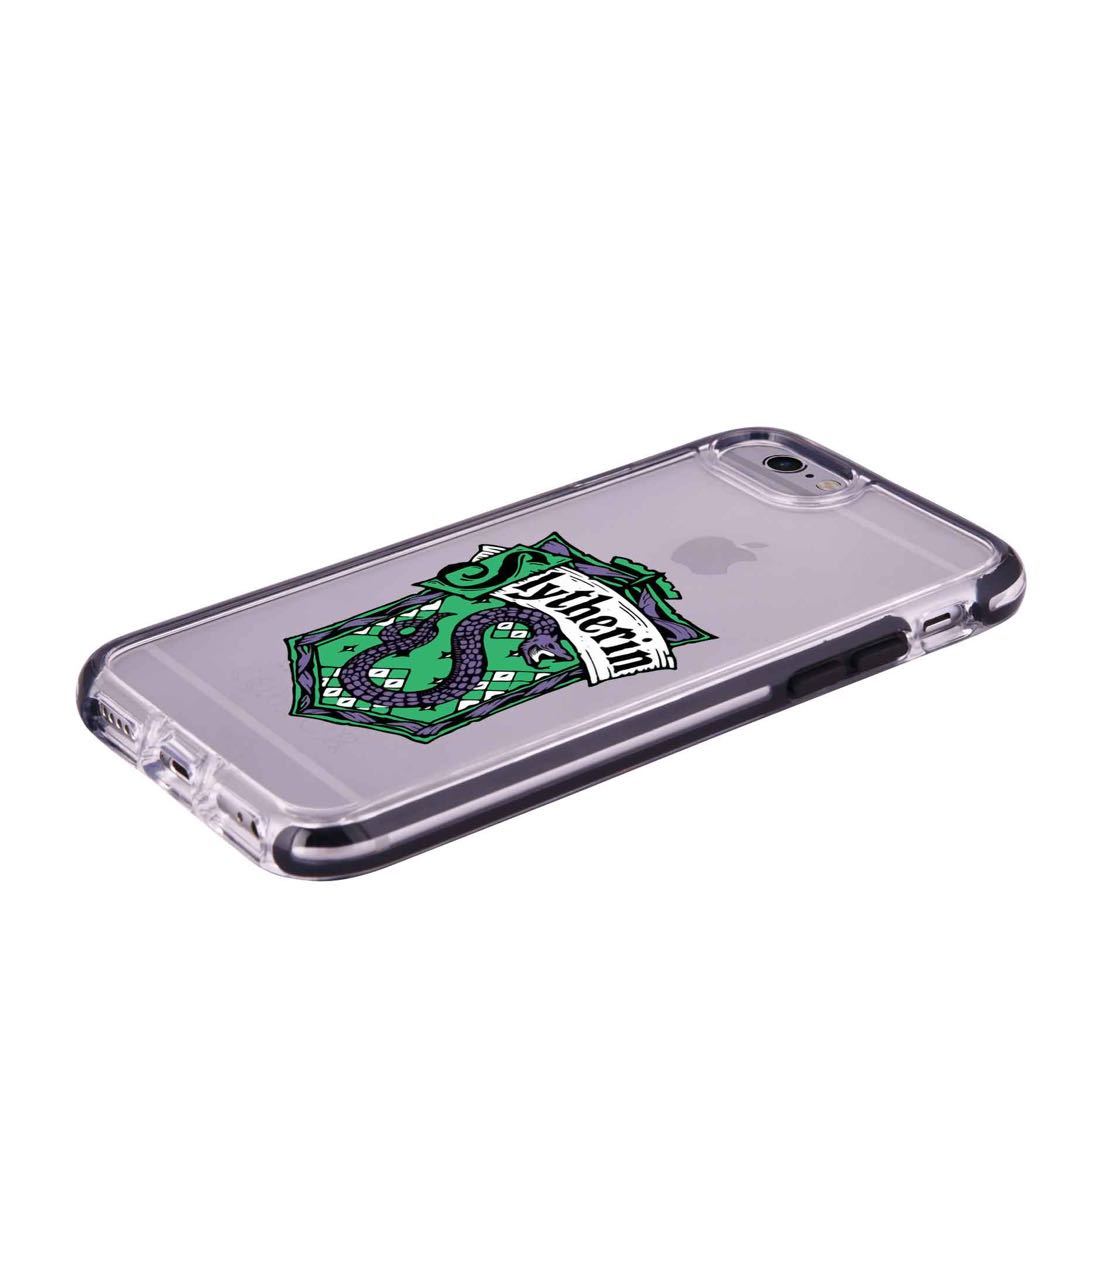 Crest Slytherin - Extreme Phone Case for iPhone 6S Plus